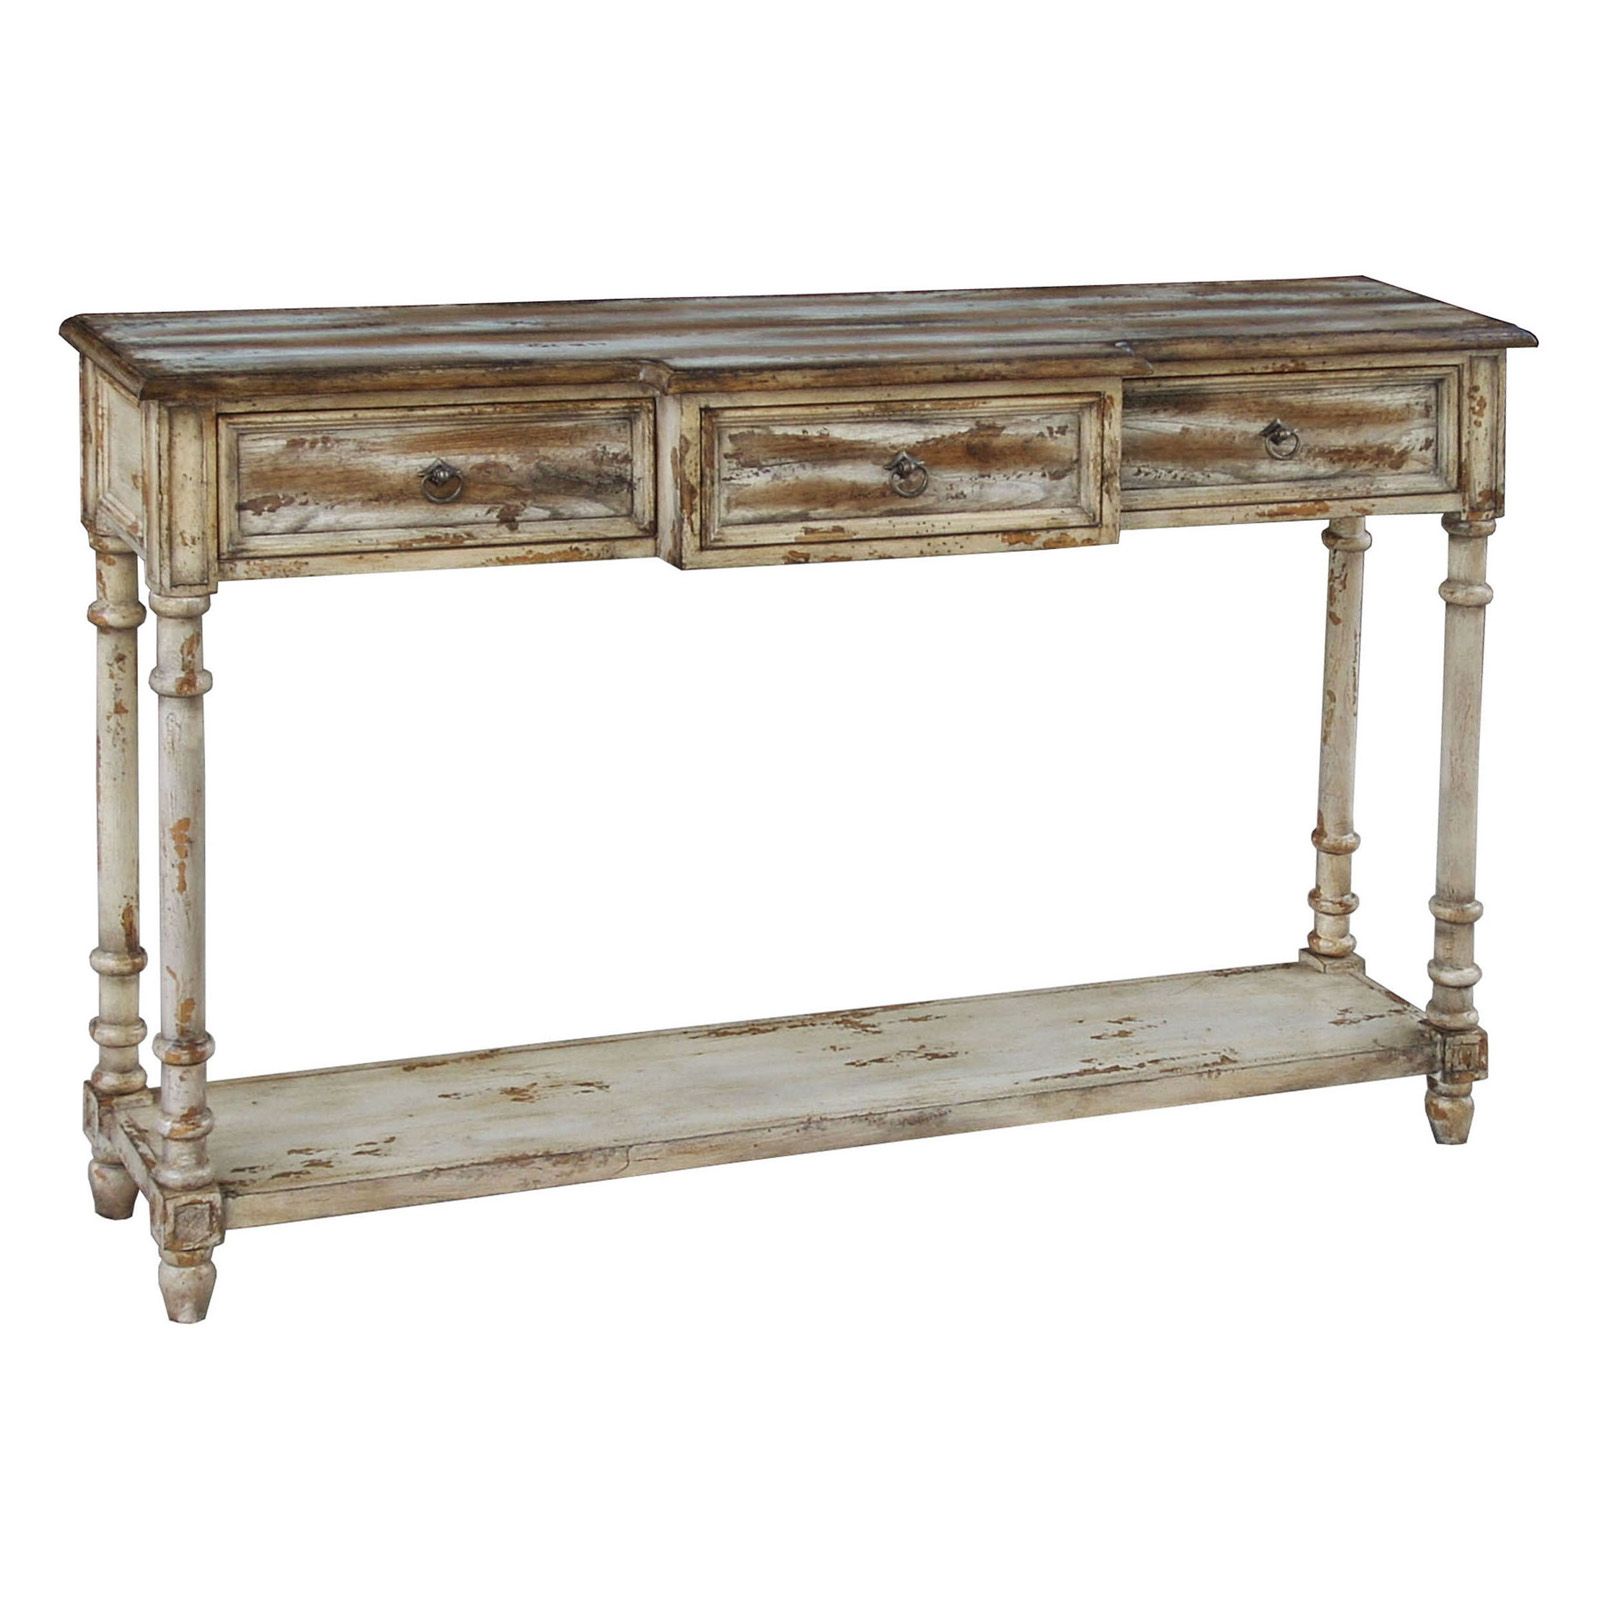 Pulaski Accents Rustic Chic Console – Juliet – Console Tables At Hayneedle In Square Weathered White Wood Console Tables (View 19 of 20)